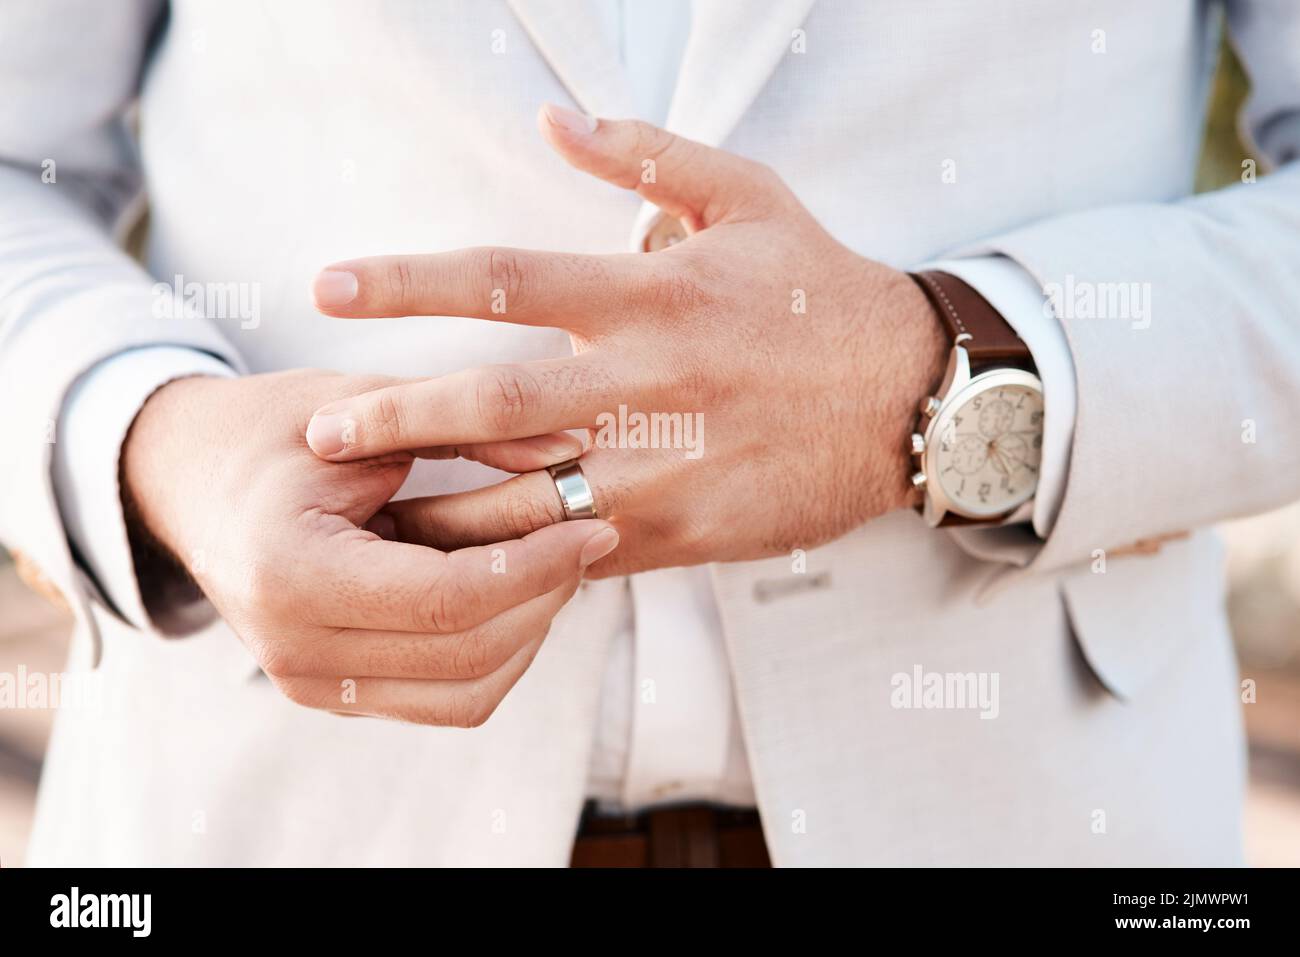 This wedding ring is a symbol of a lifetime commitment. an unrecognizable bridegroom adjusting his ring on his wedding day. Stock Photo